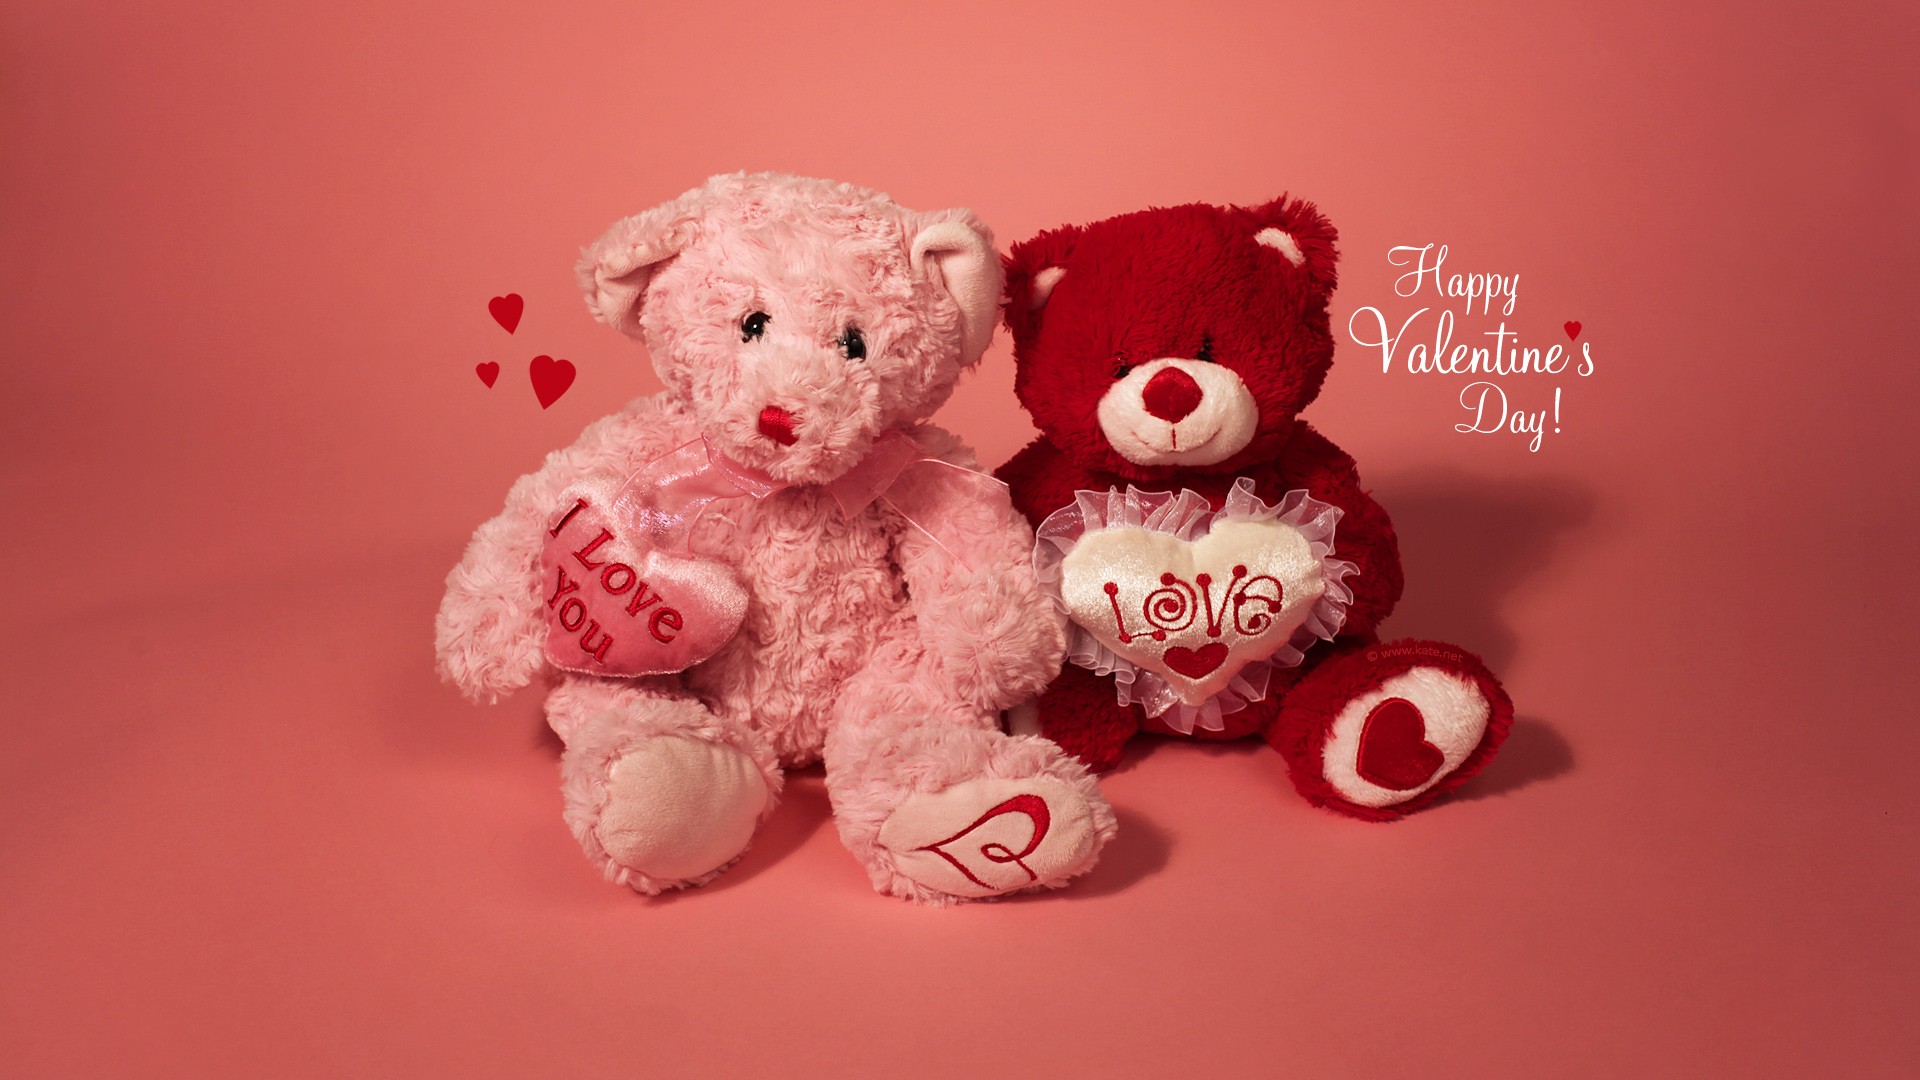 Cute Two Dolls Happy Valentine Day Wallpaper Background With